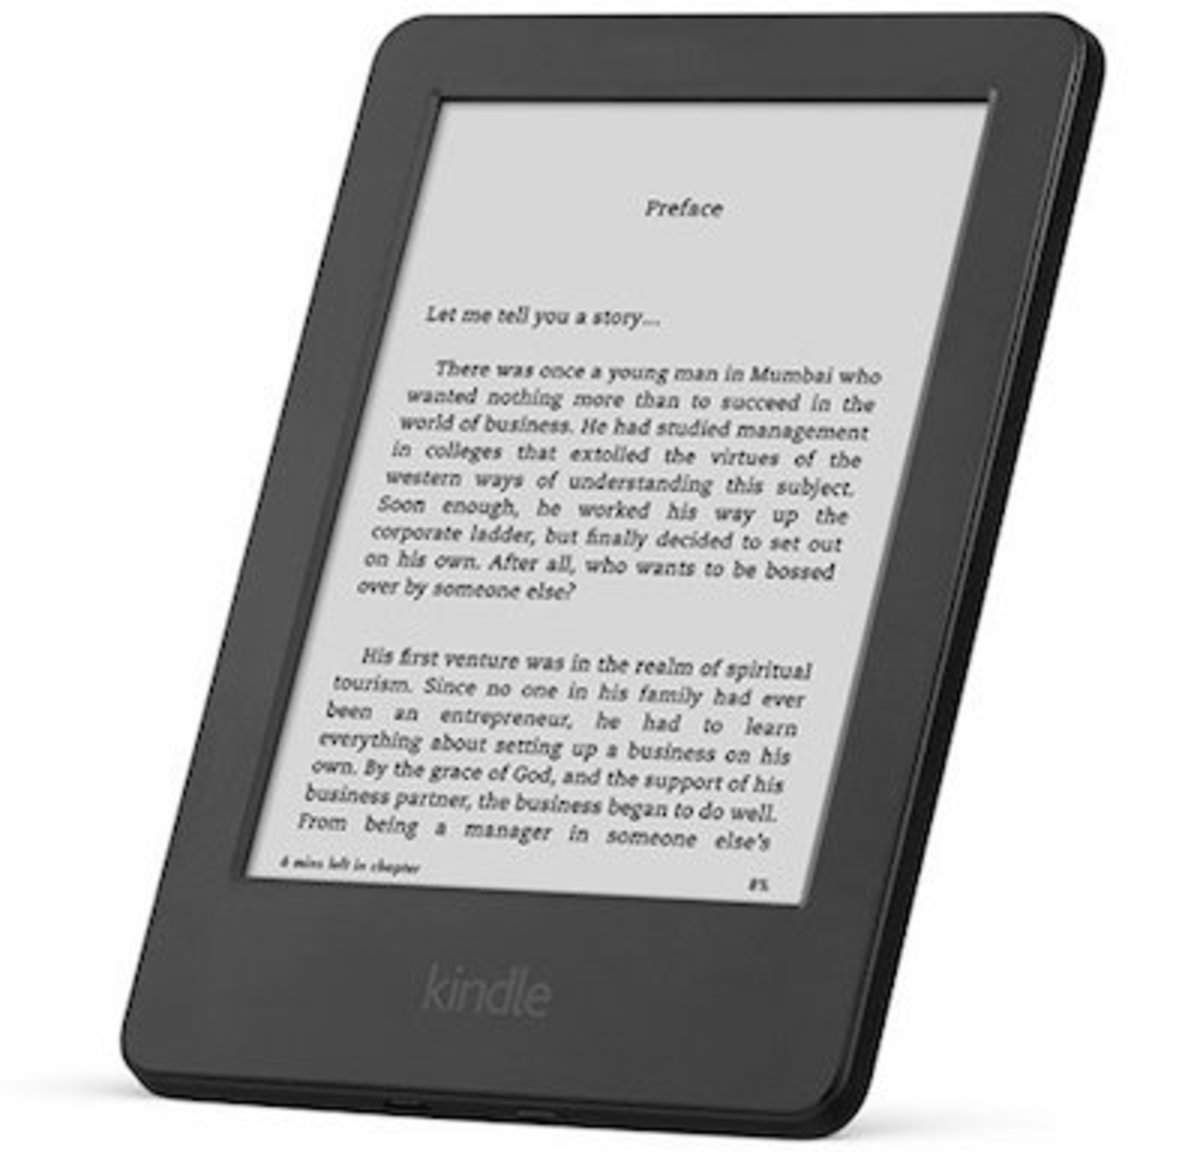 kindle paperwhite 7th generation